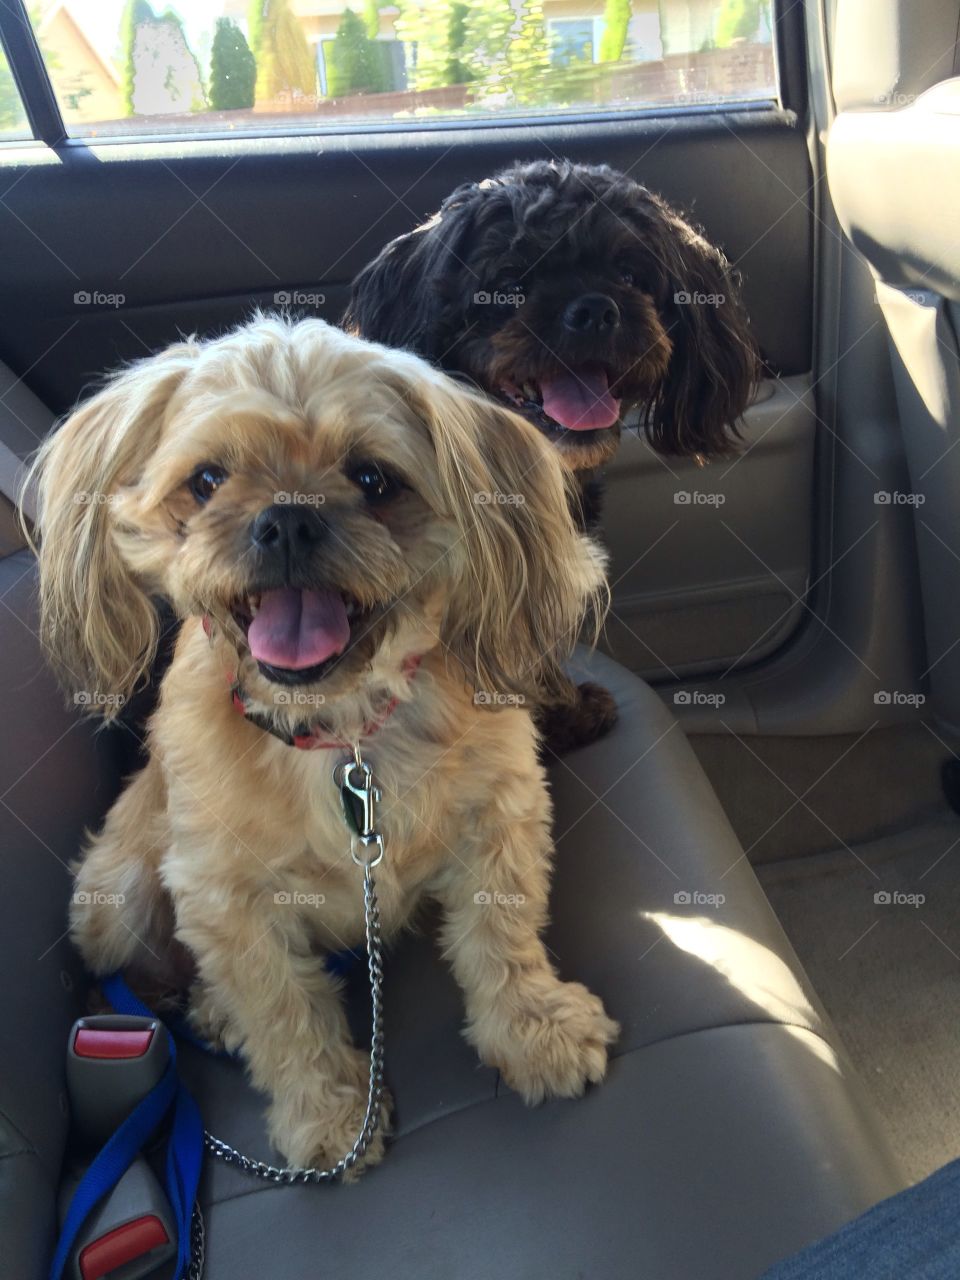 These two dogs are all smiles for a car ride!
